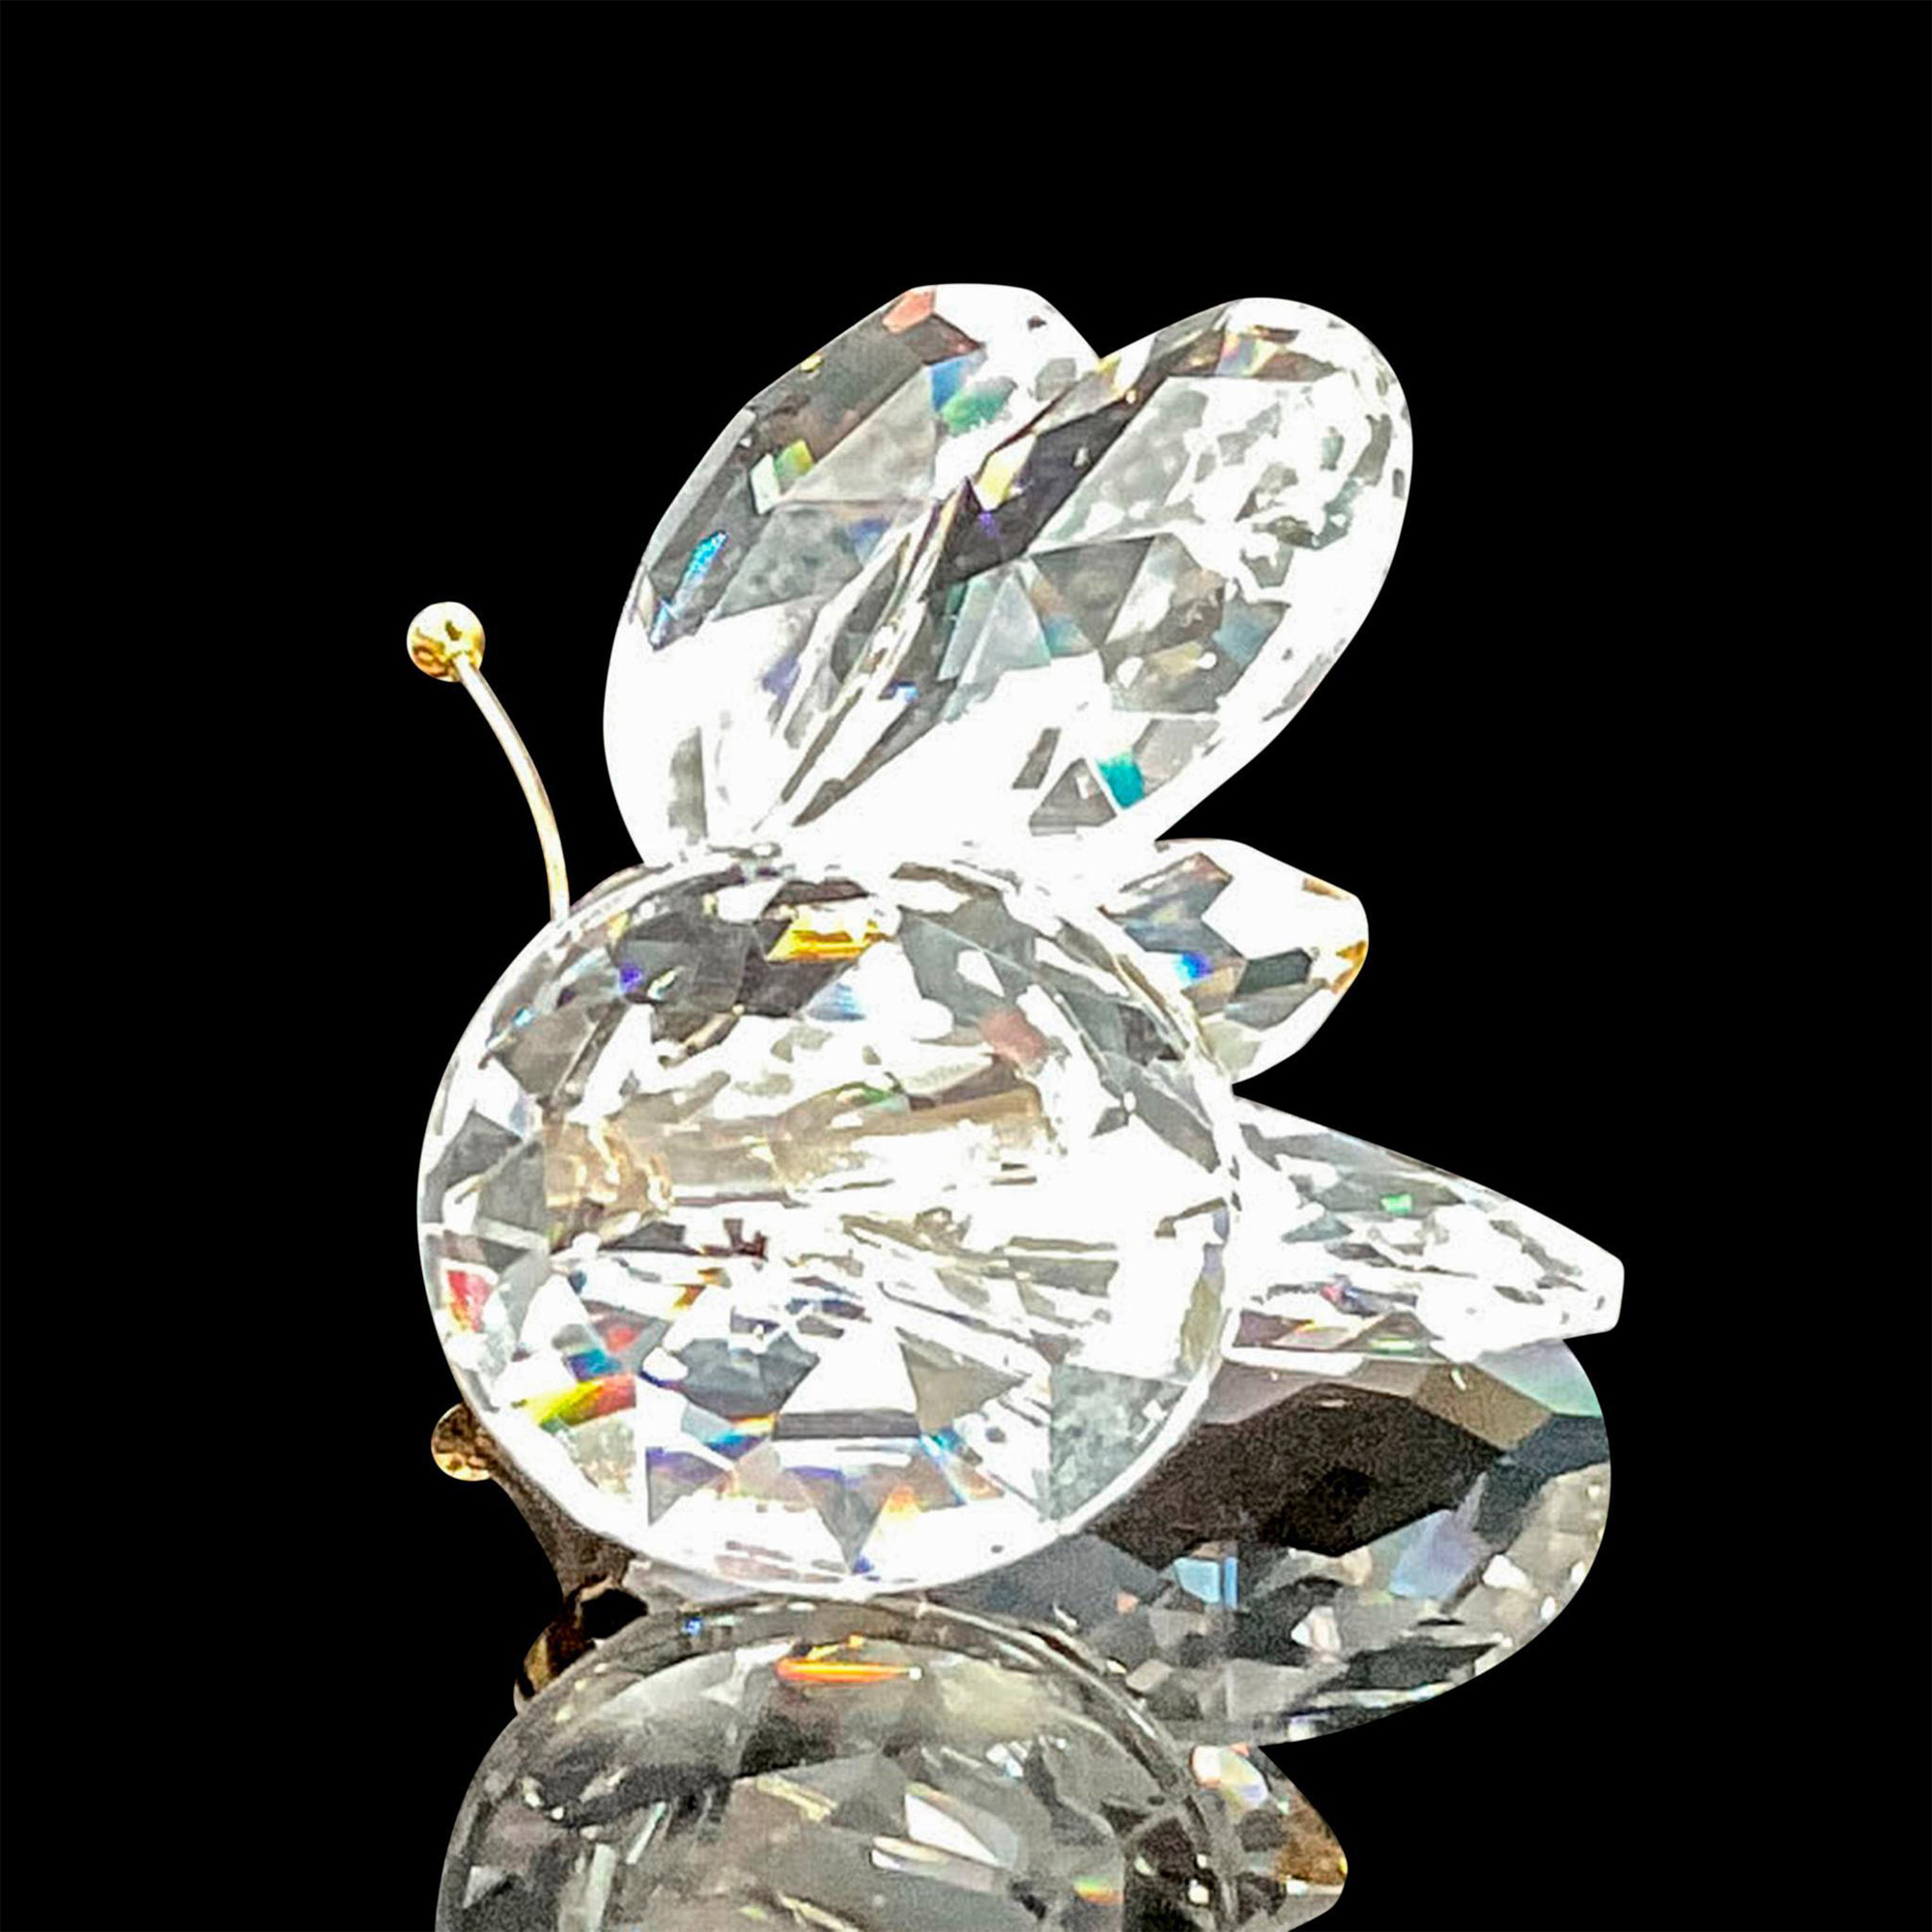 Swarovski Crystal Figurine, Butterfly with Gold Antennae - Image 3 of 4